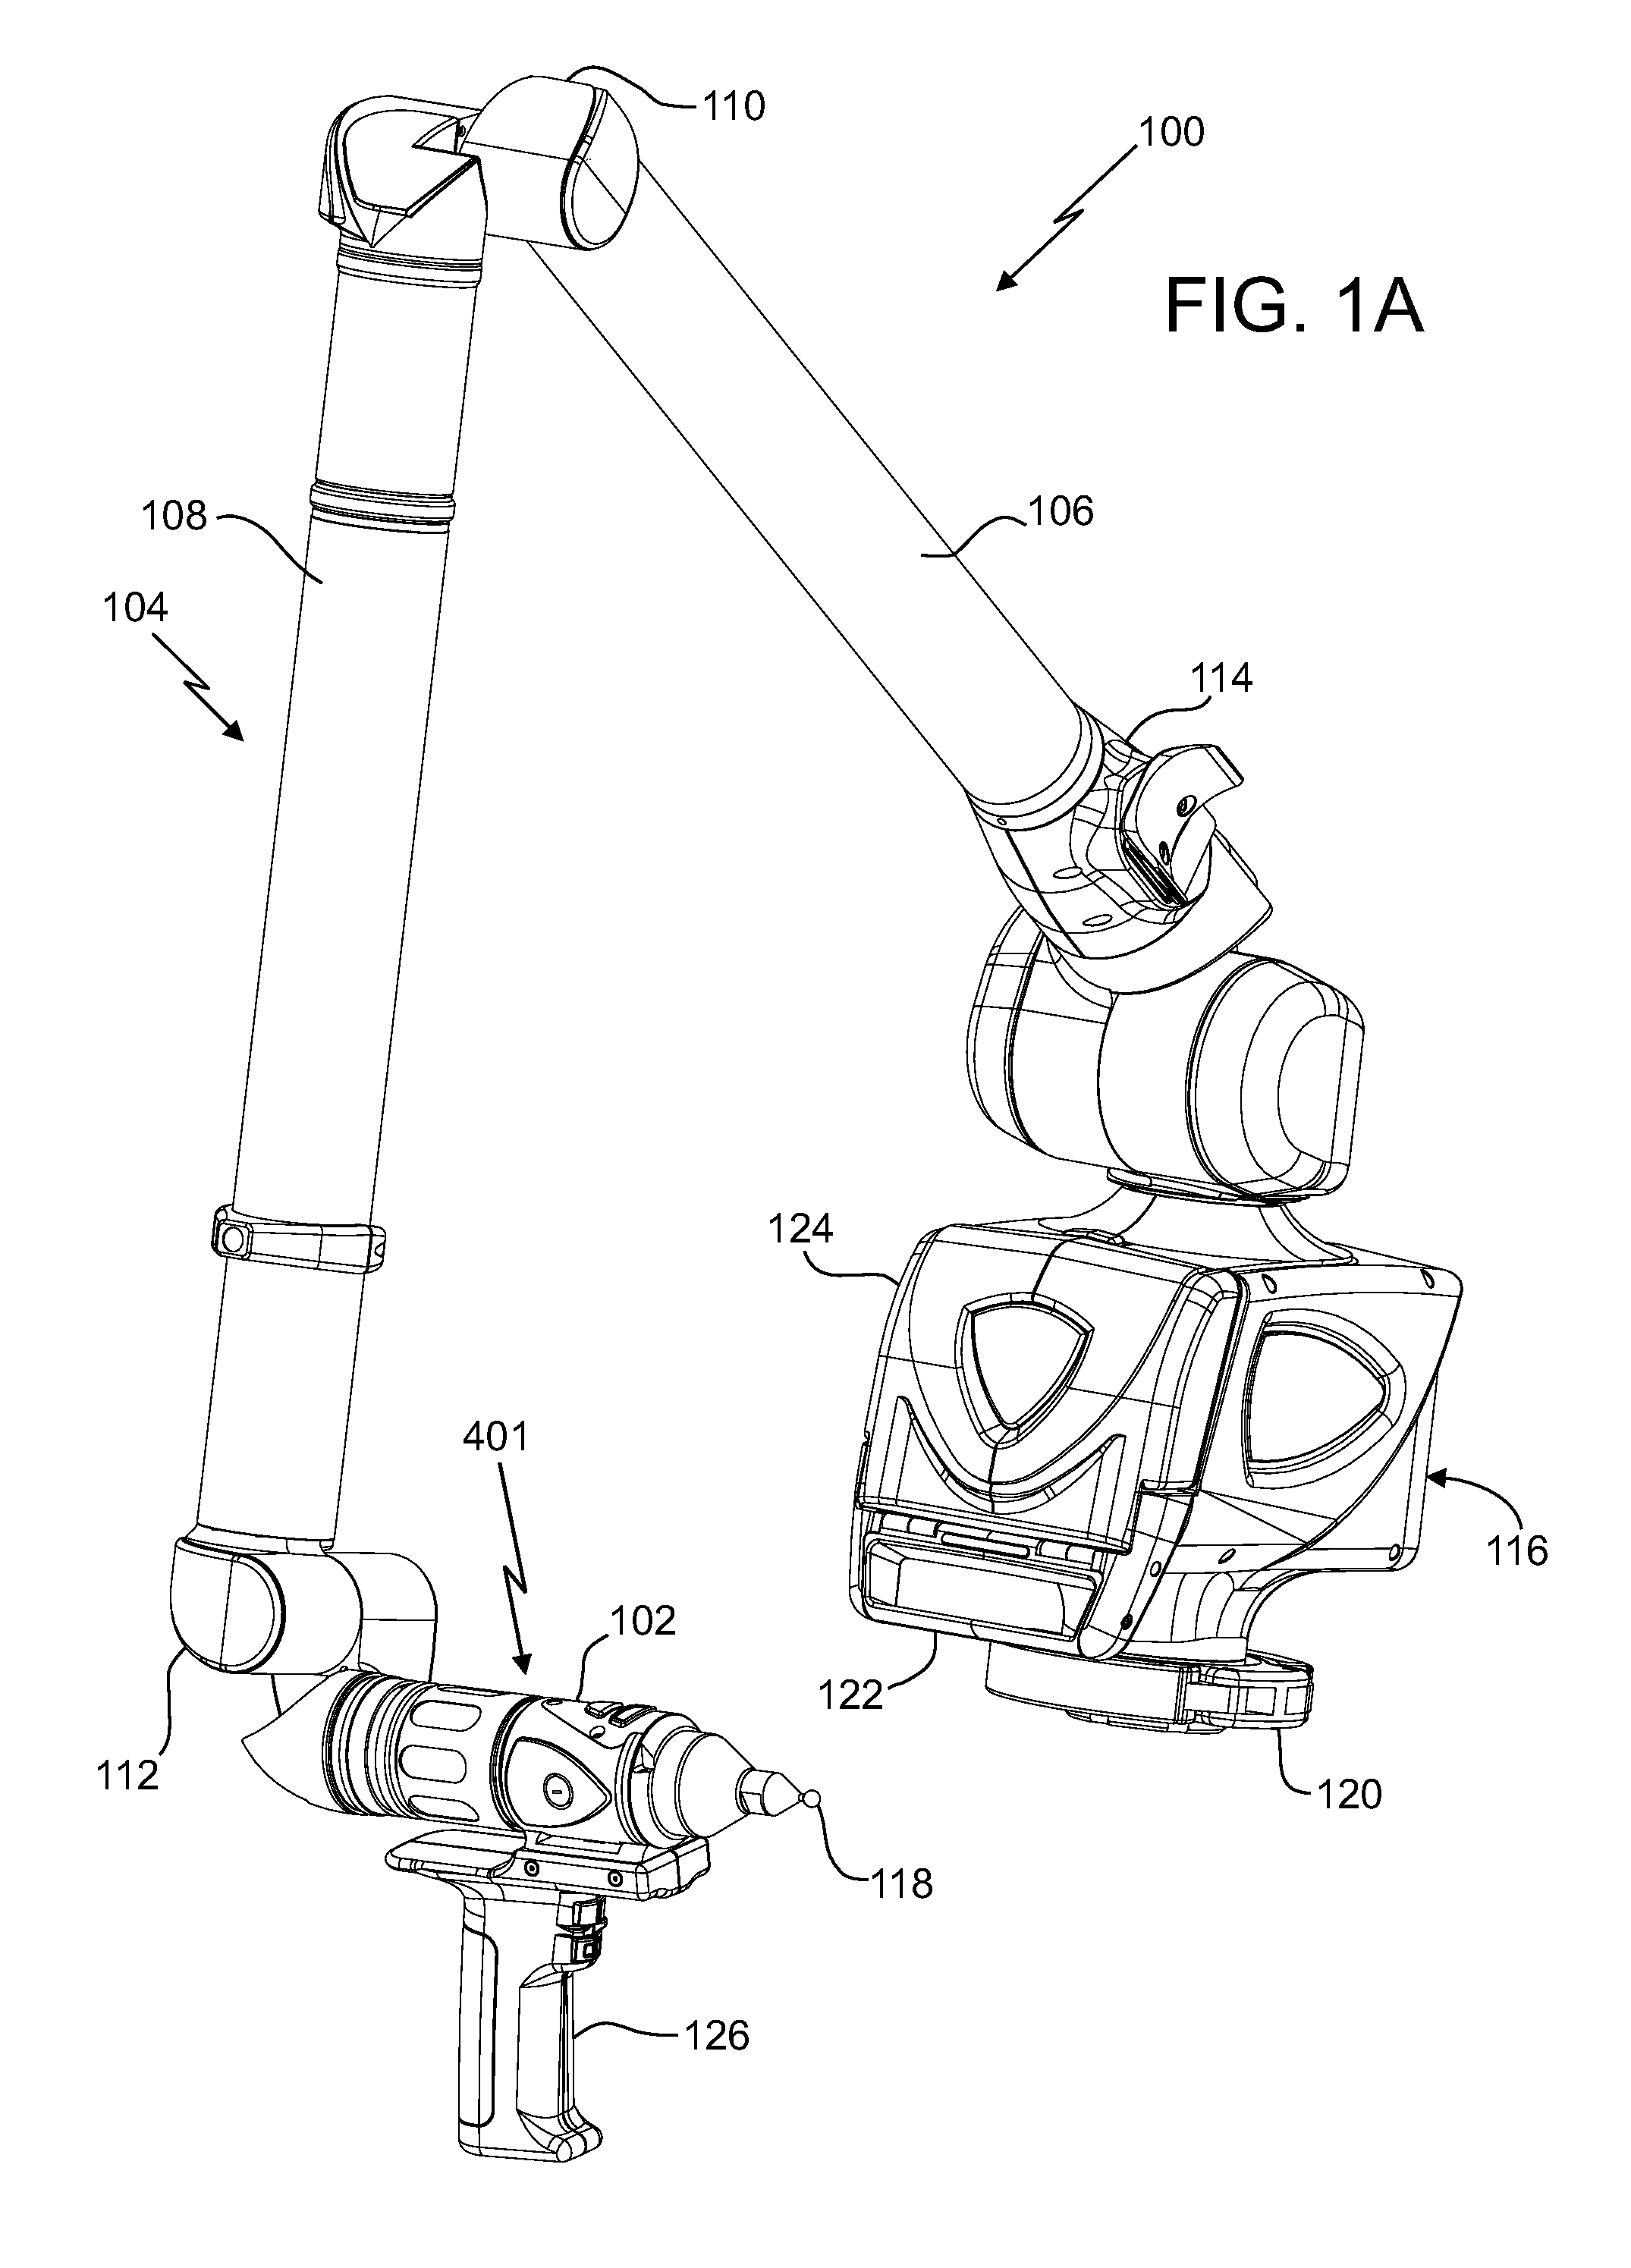 Laser line probe that produces a line of light having a substantially even intensity distribution